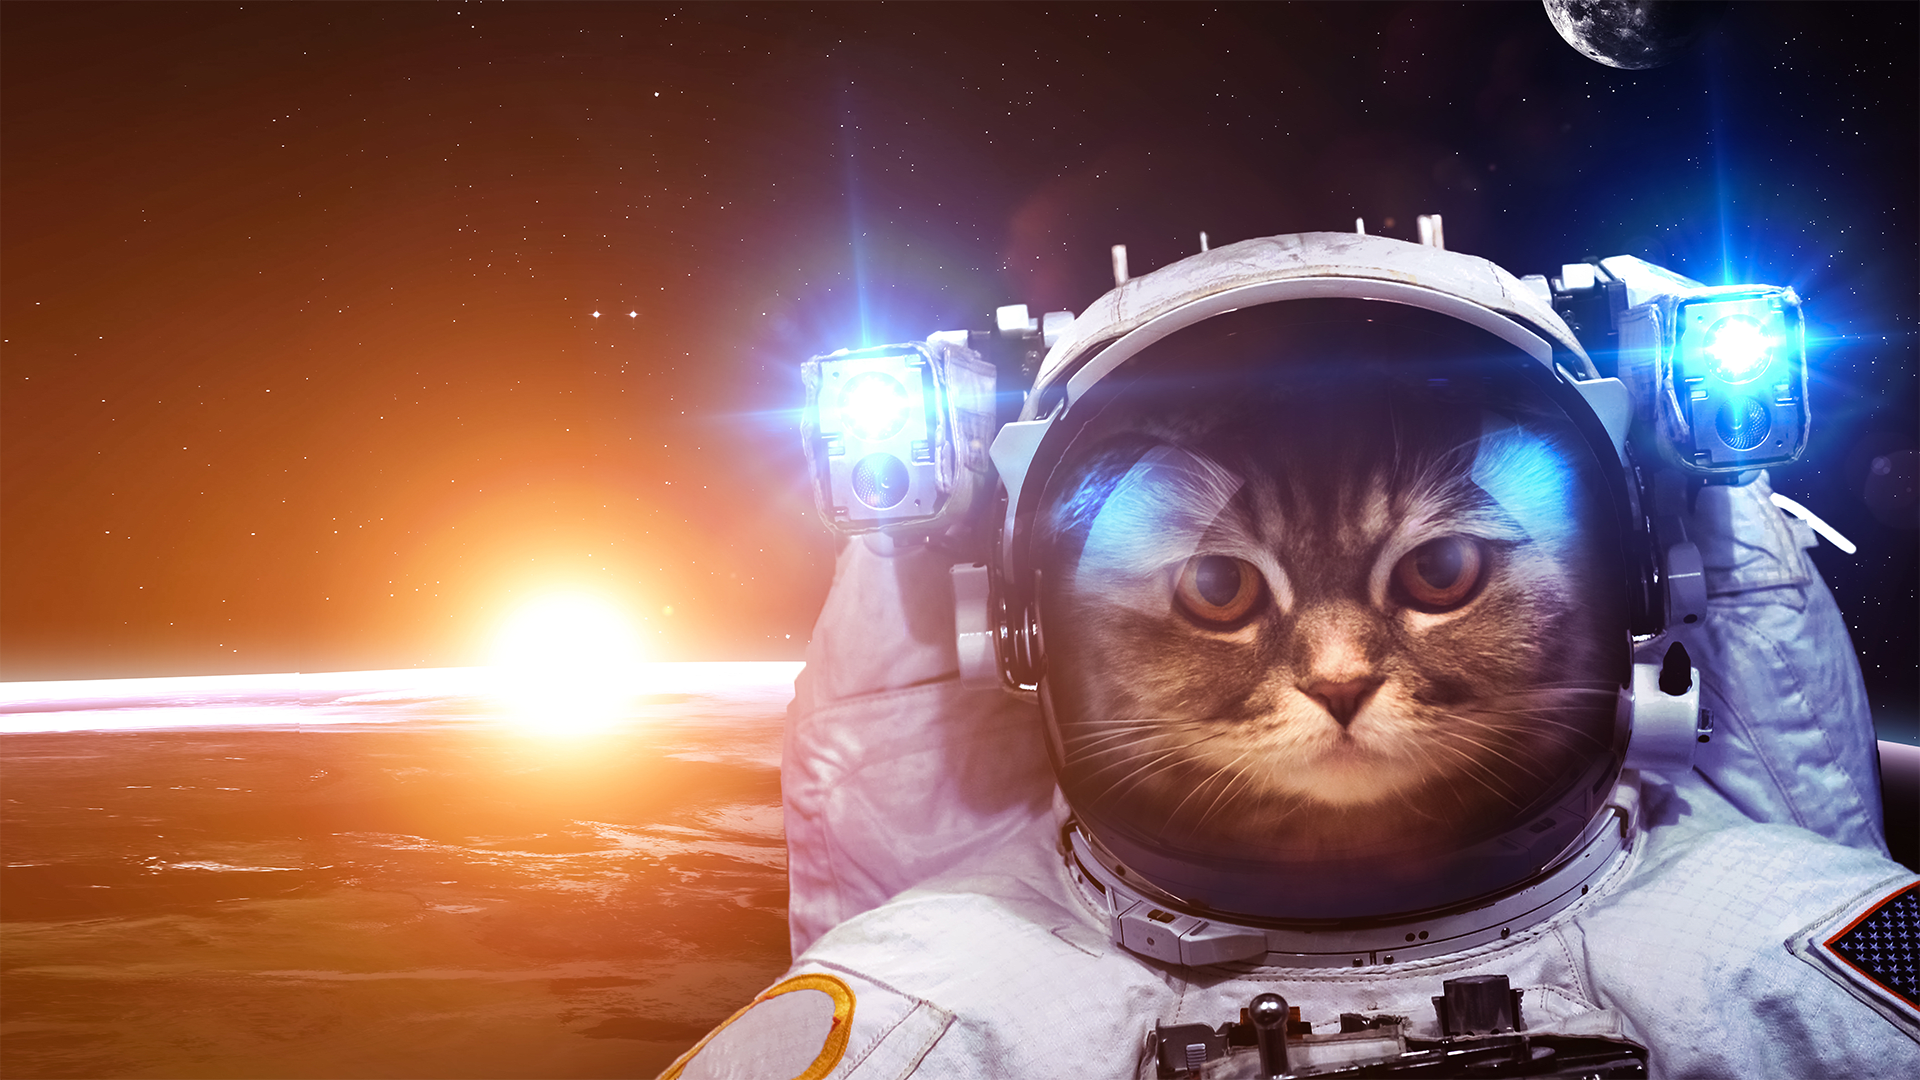 How long can people (and animals) survive in outer space?